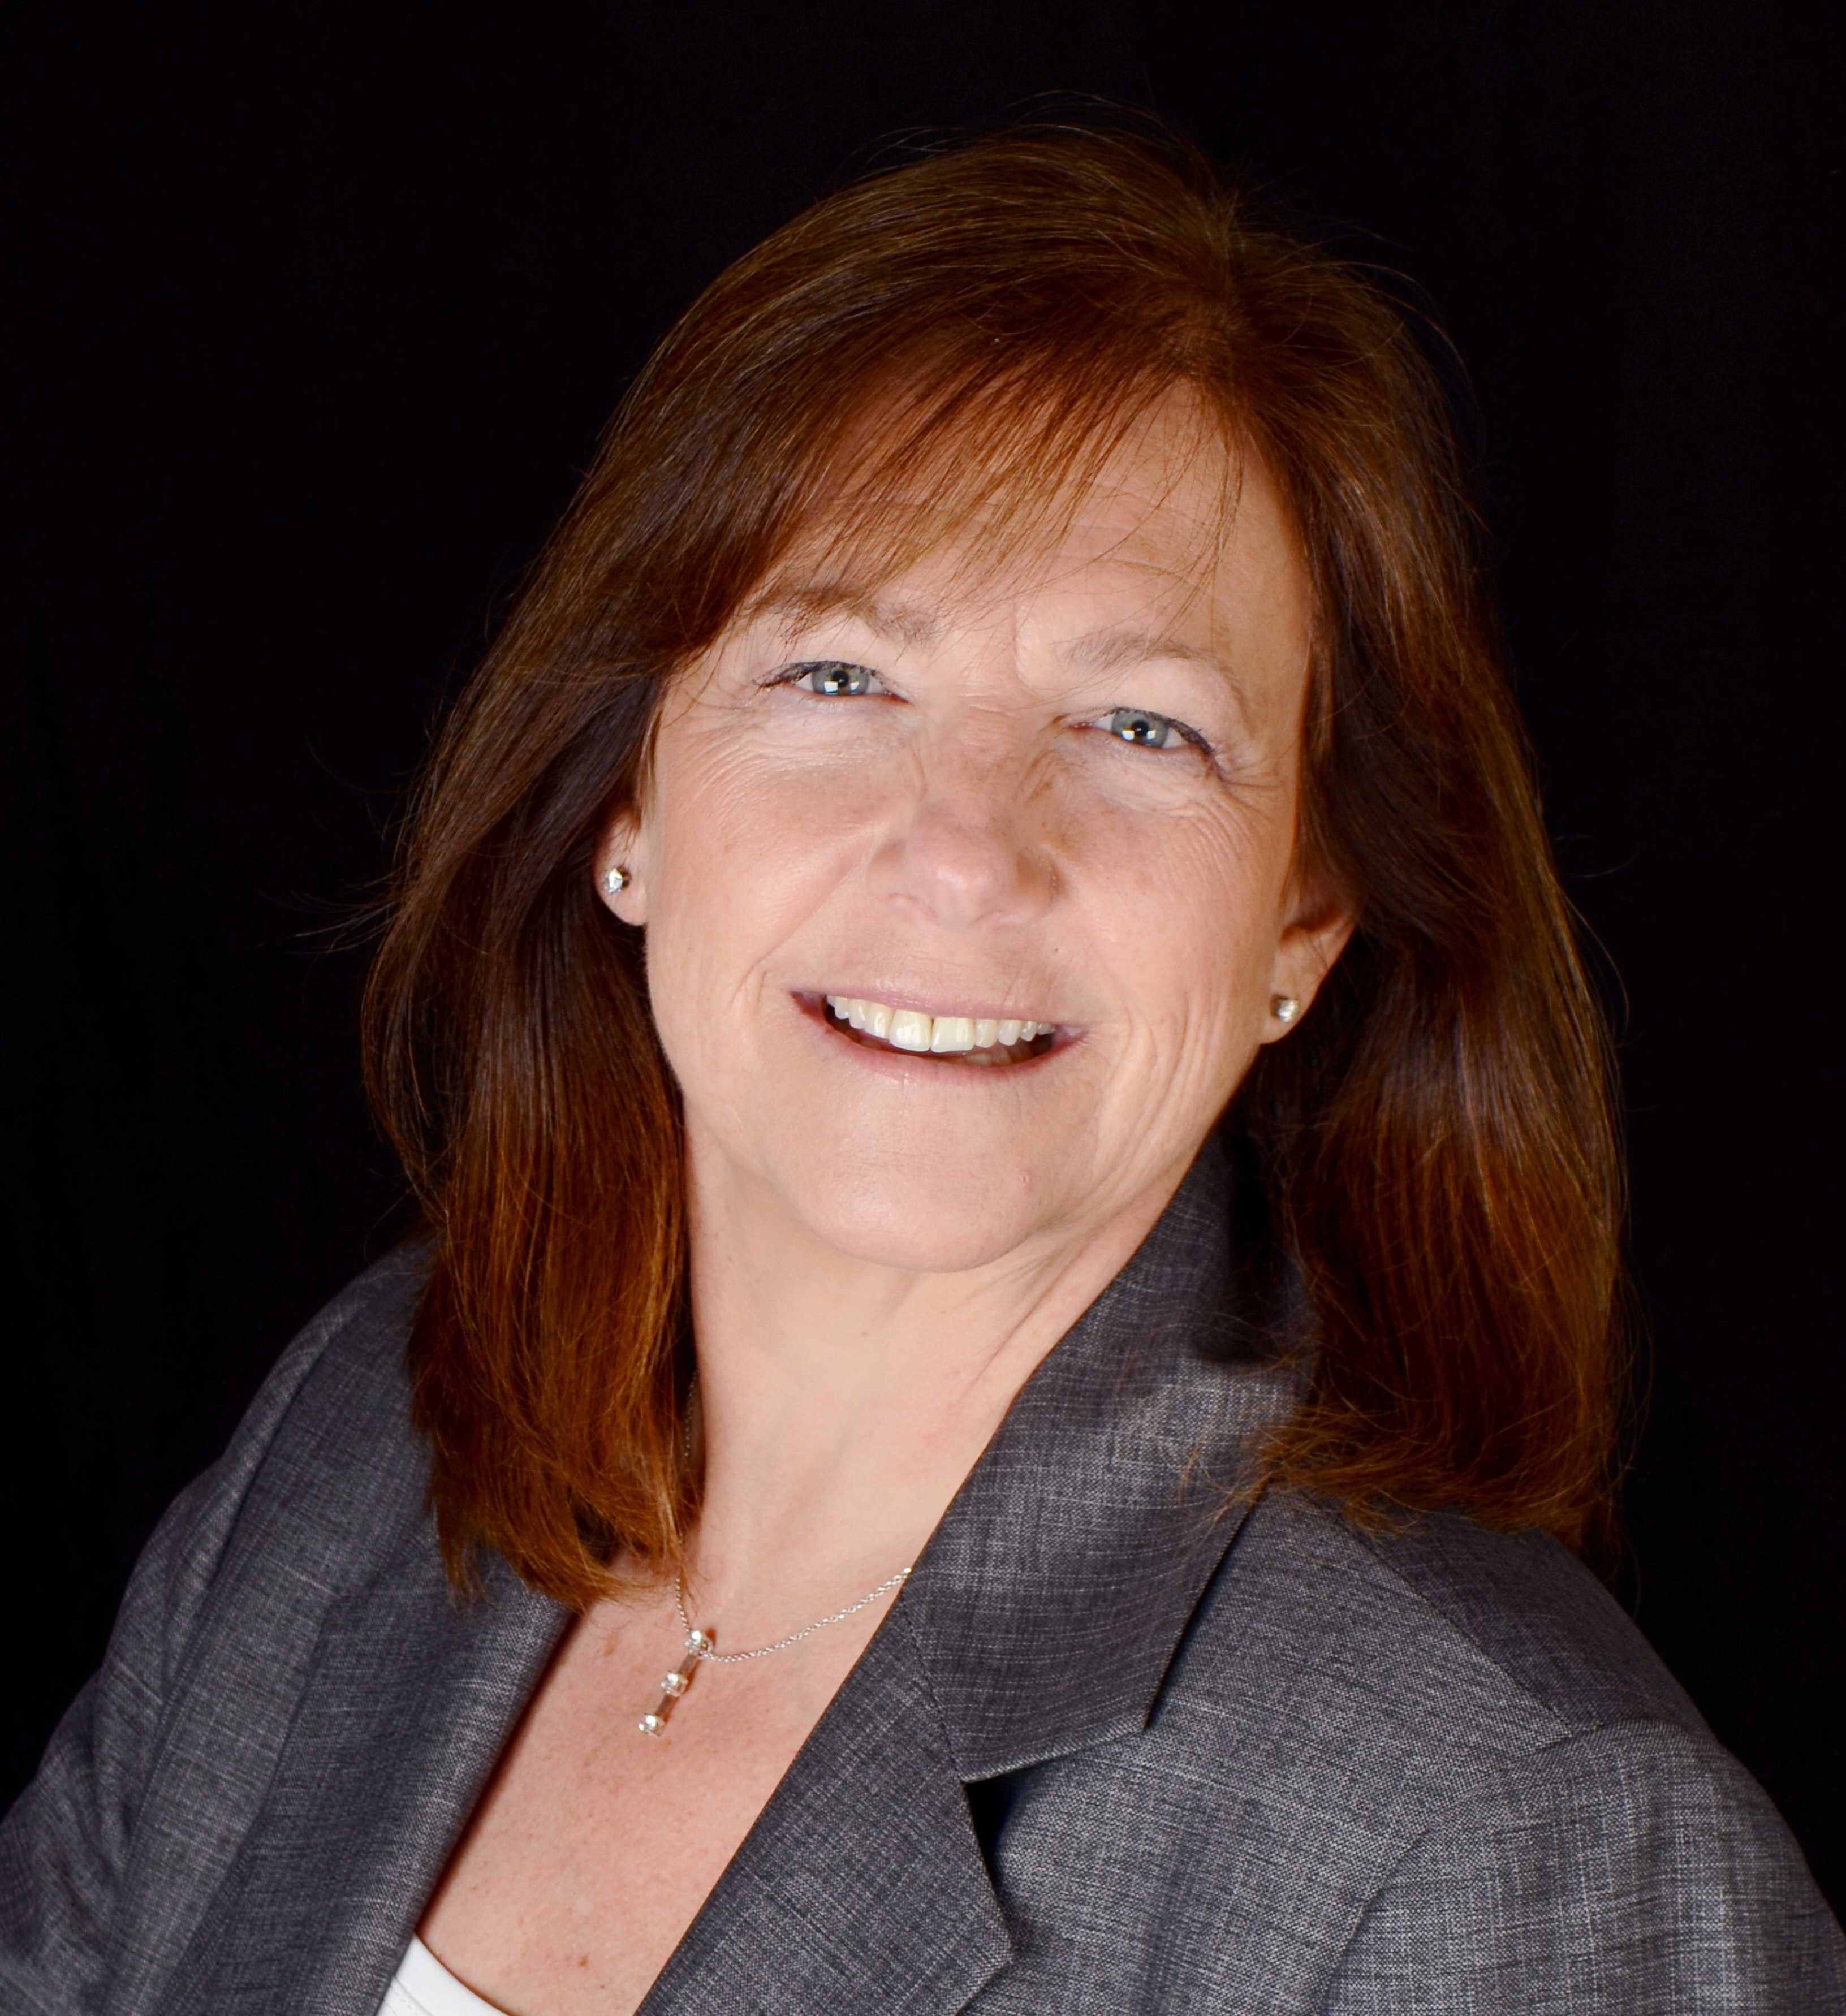 Jayne Bail is a mortgage loan originator at Denver-headquartered Platte River Mortgage &amp; Investments Inc. and president of the Colorado Association of Mortgage Professionals (CoAMP)